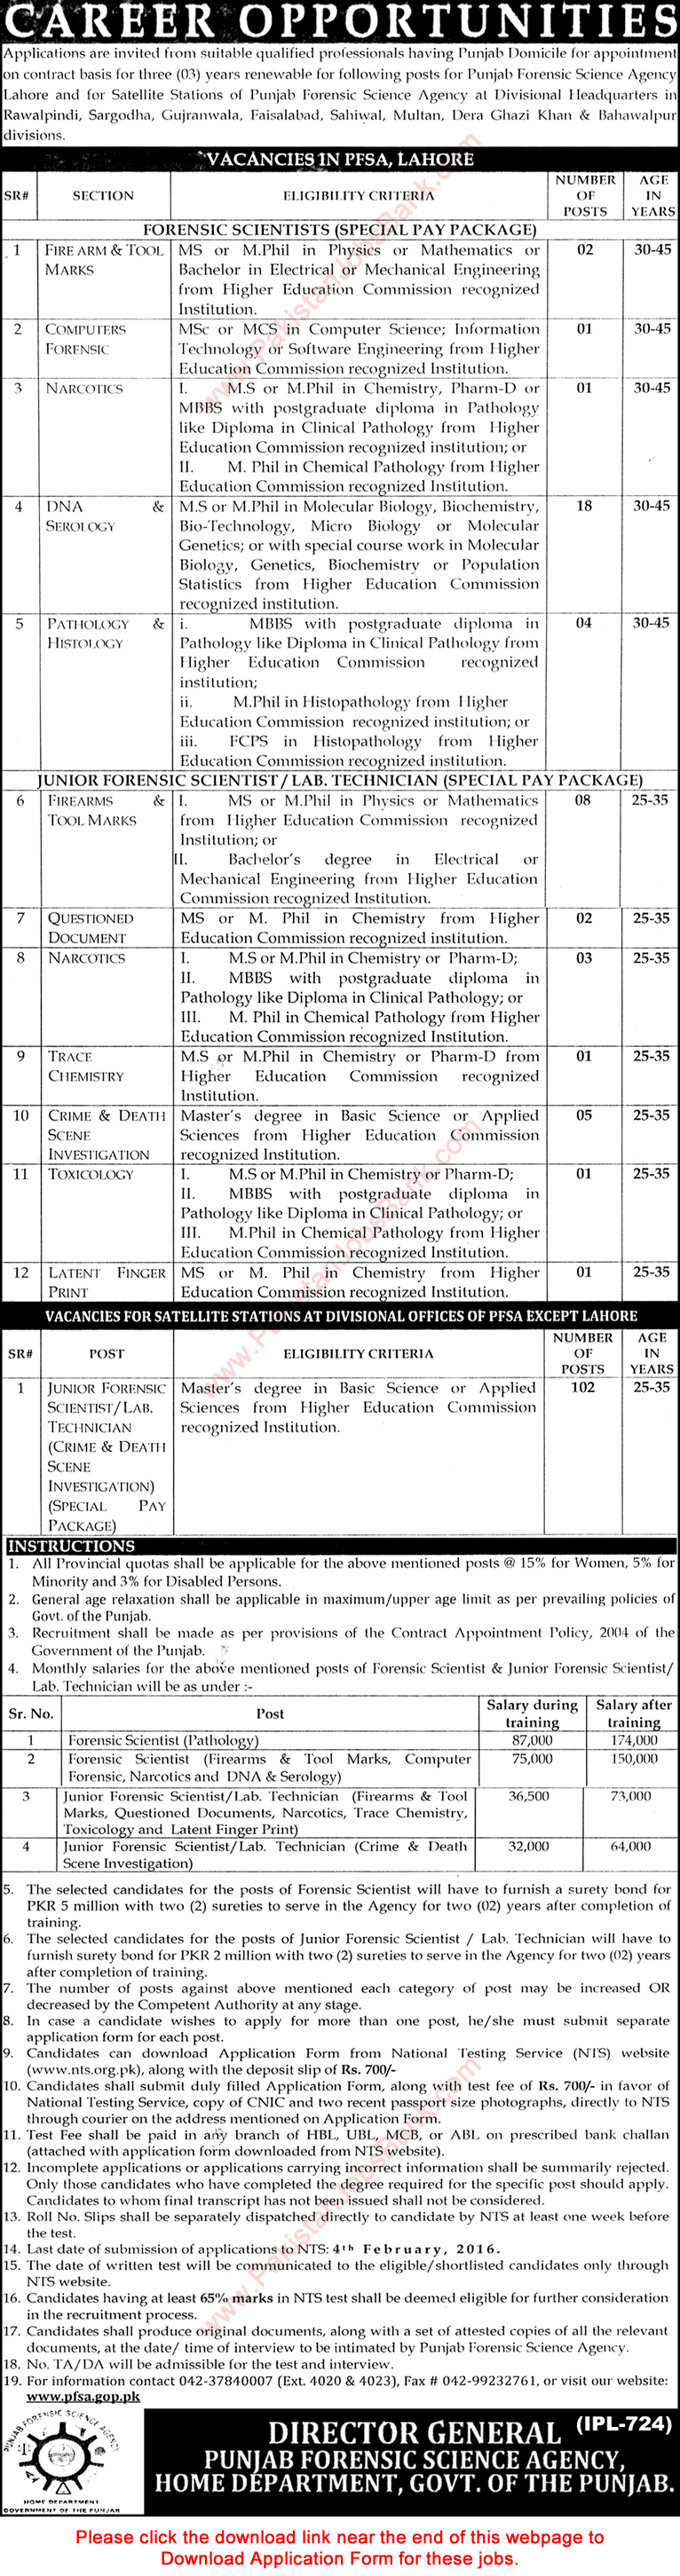 Punjab Forensic Science Agency Jobs 2016 PFSA NTS Application Form Forensic Scientists & Lab Technicians Latest